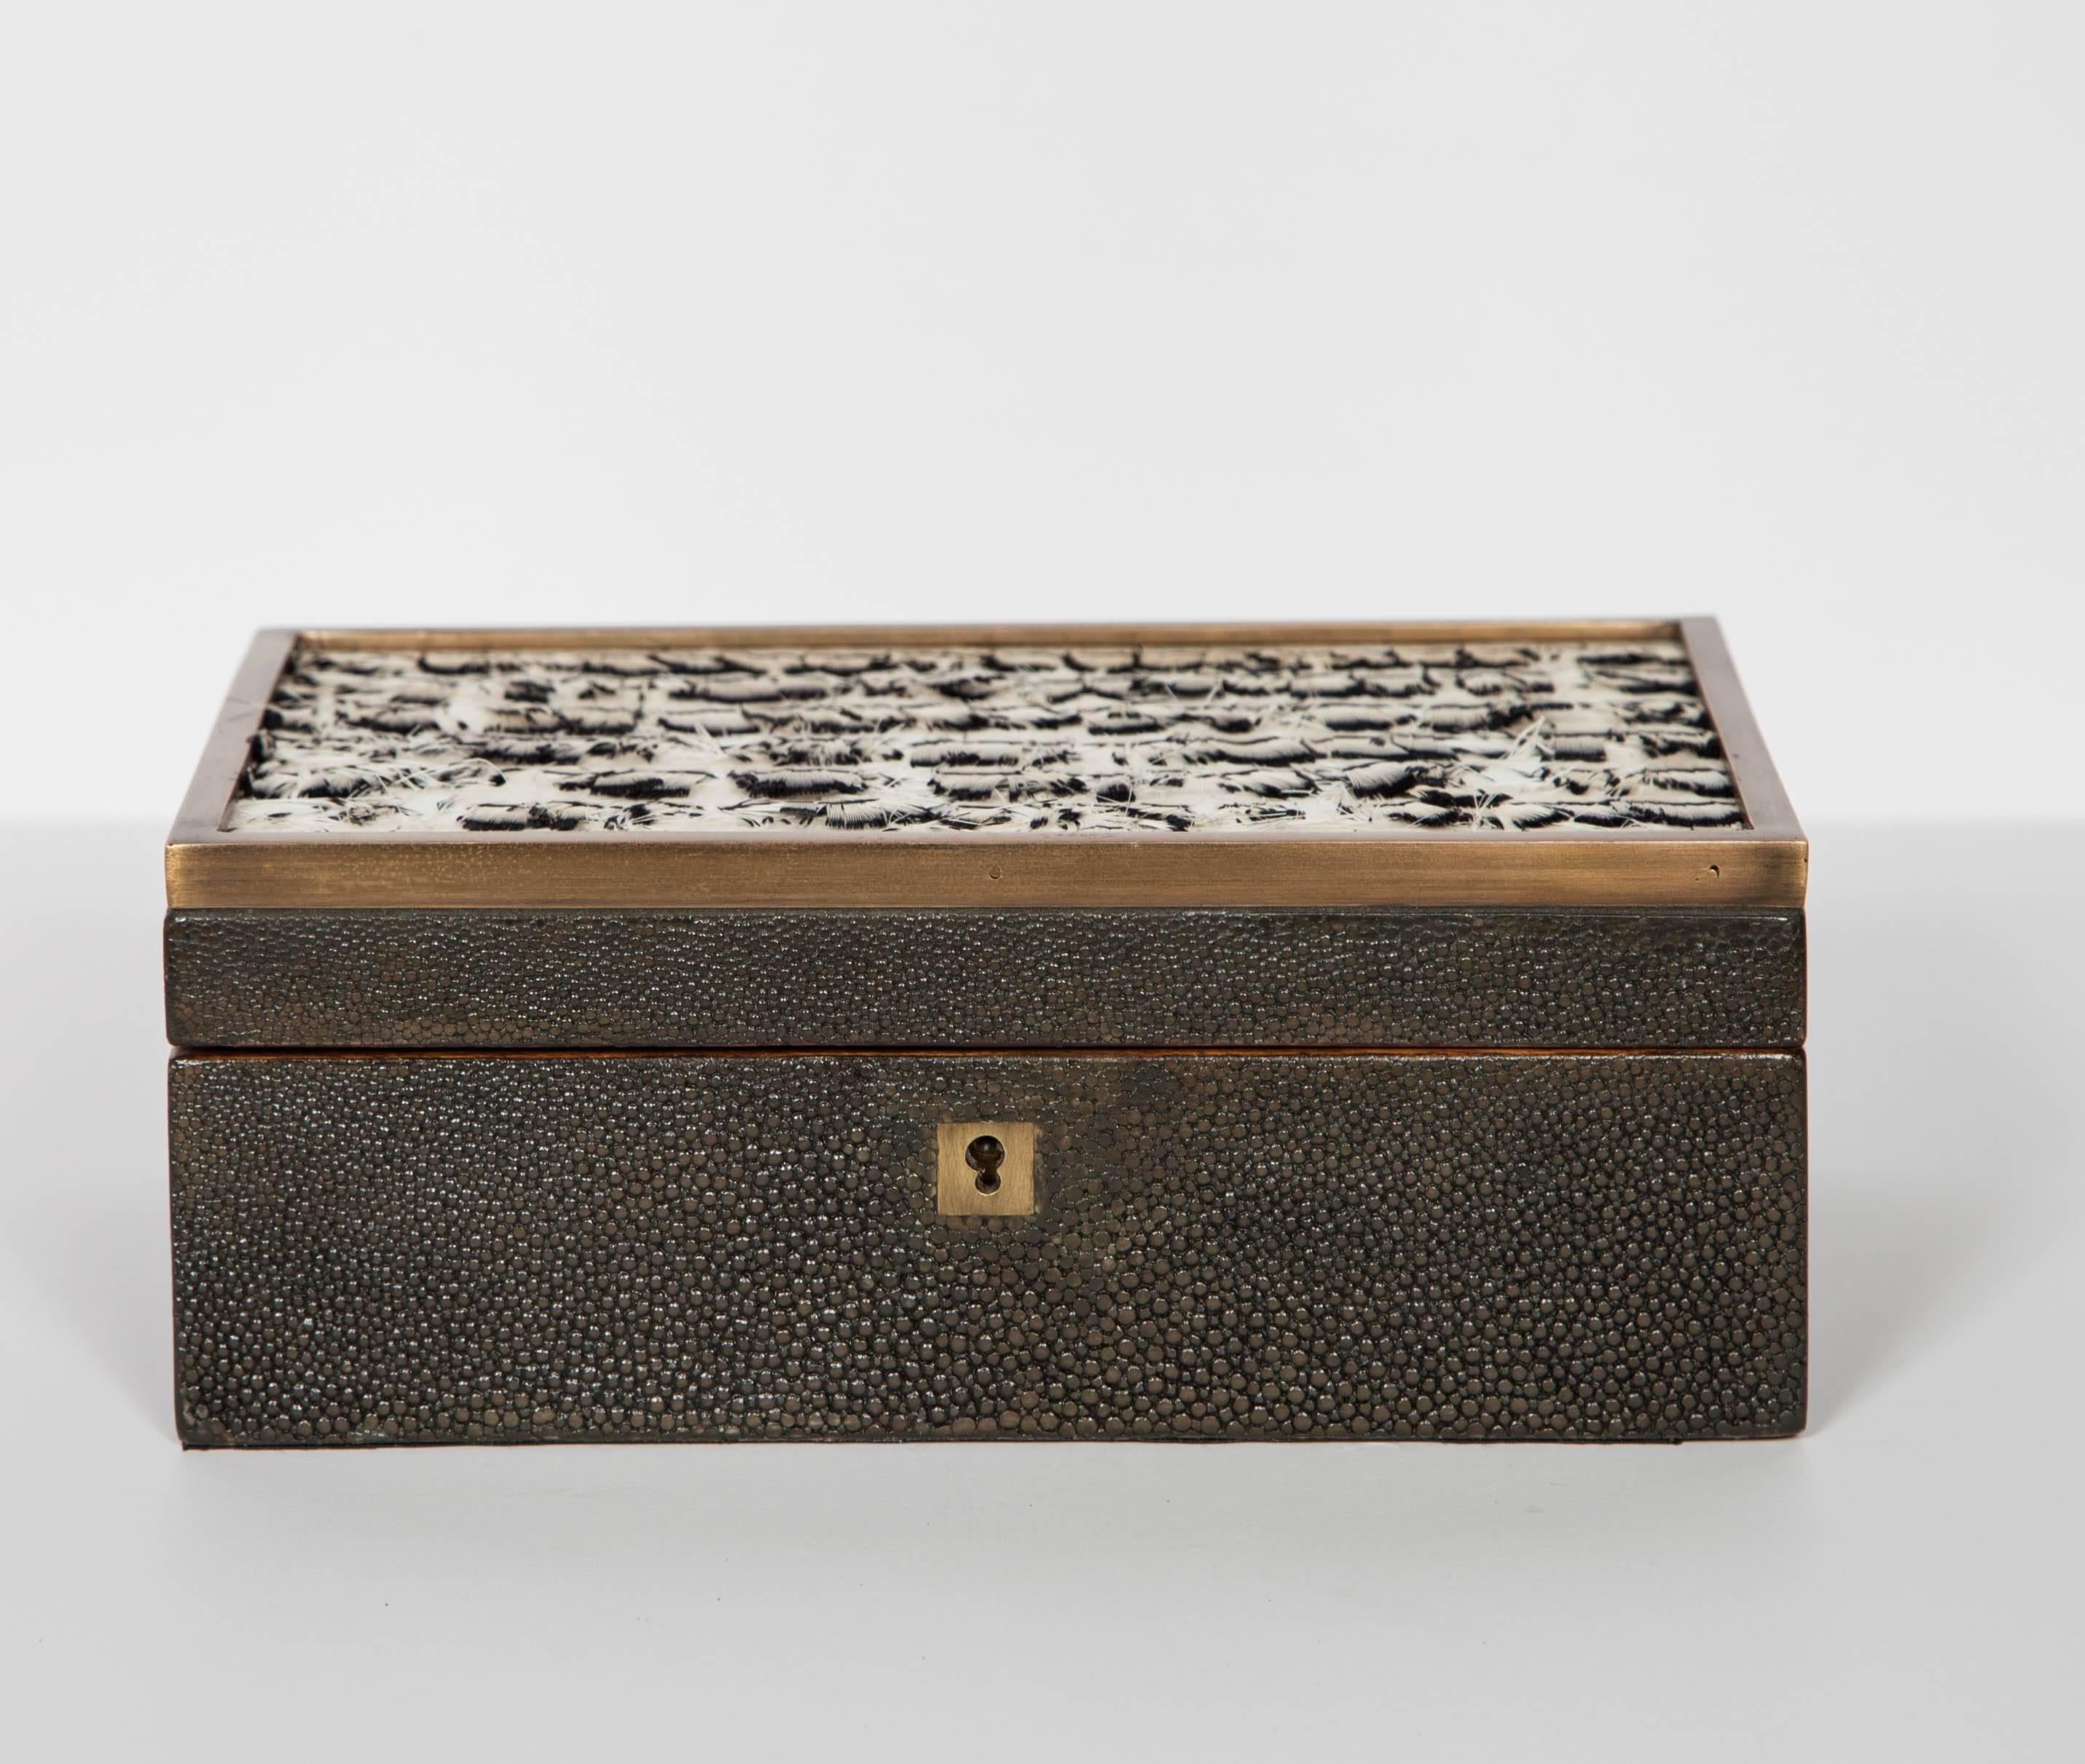 Jewelry box or decorative box in genuine stingray with speckled feather accents. Features hand-dyed shagreen in charcoal grey and hand-forged bronze trim details. The interior of the box is made of palmwood and is fitted with a removable black